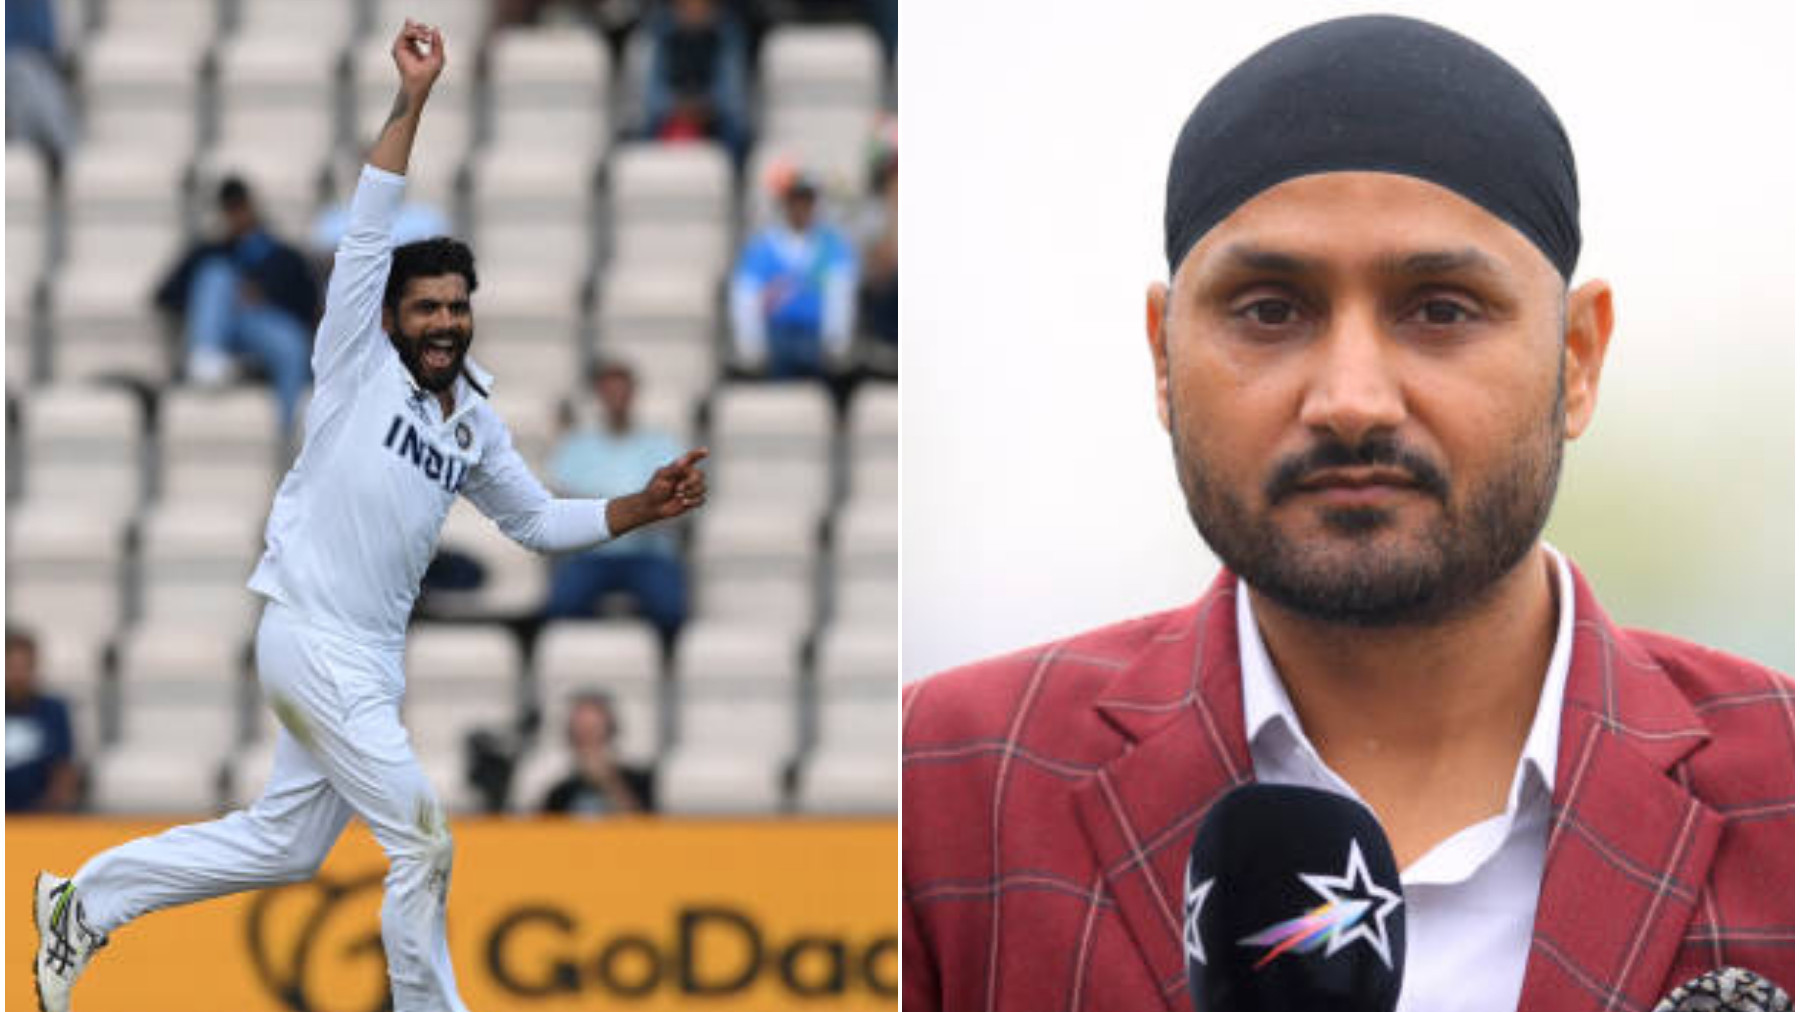 ENG v IND 2021: If four fast bowlers play, Jadeja has to be first-choice spinner- Harbhajan Singh